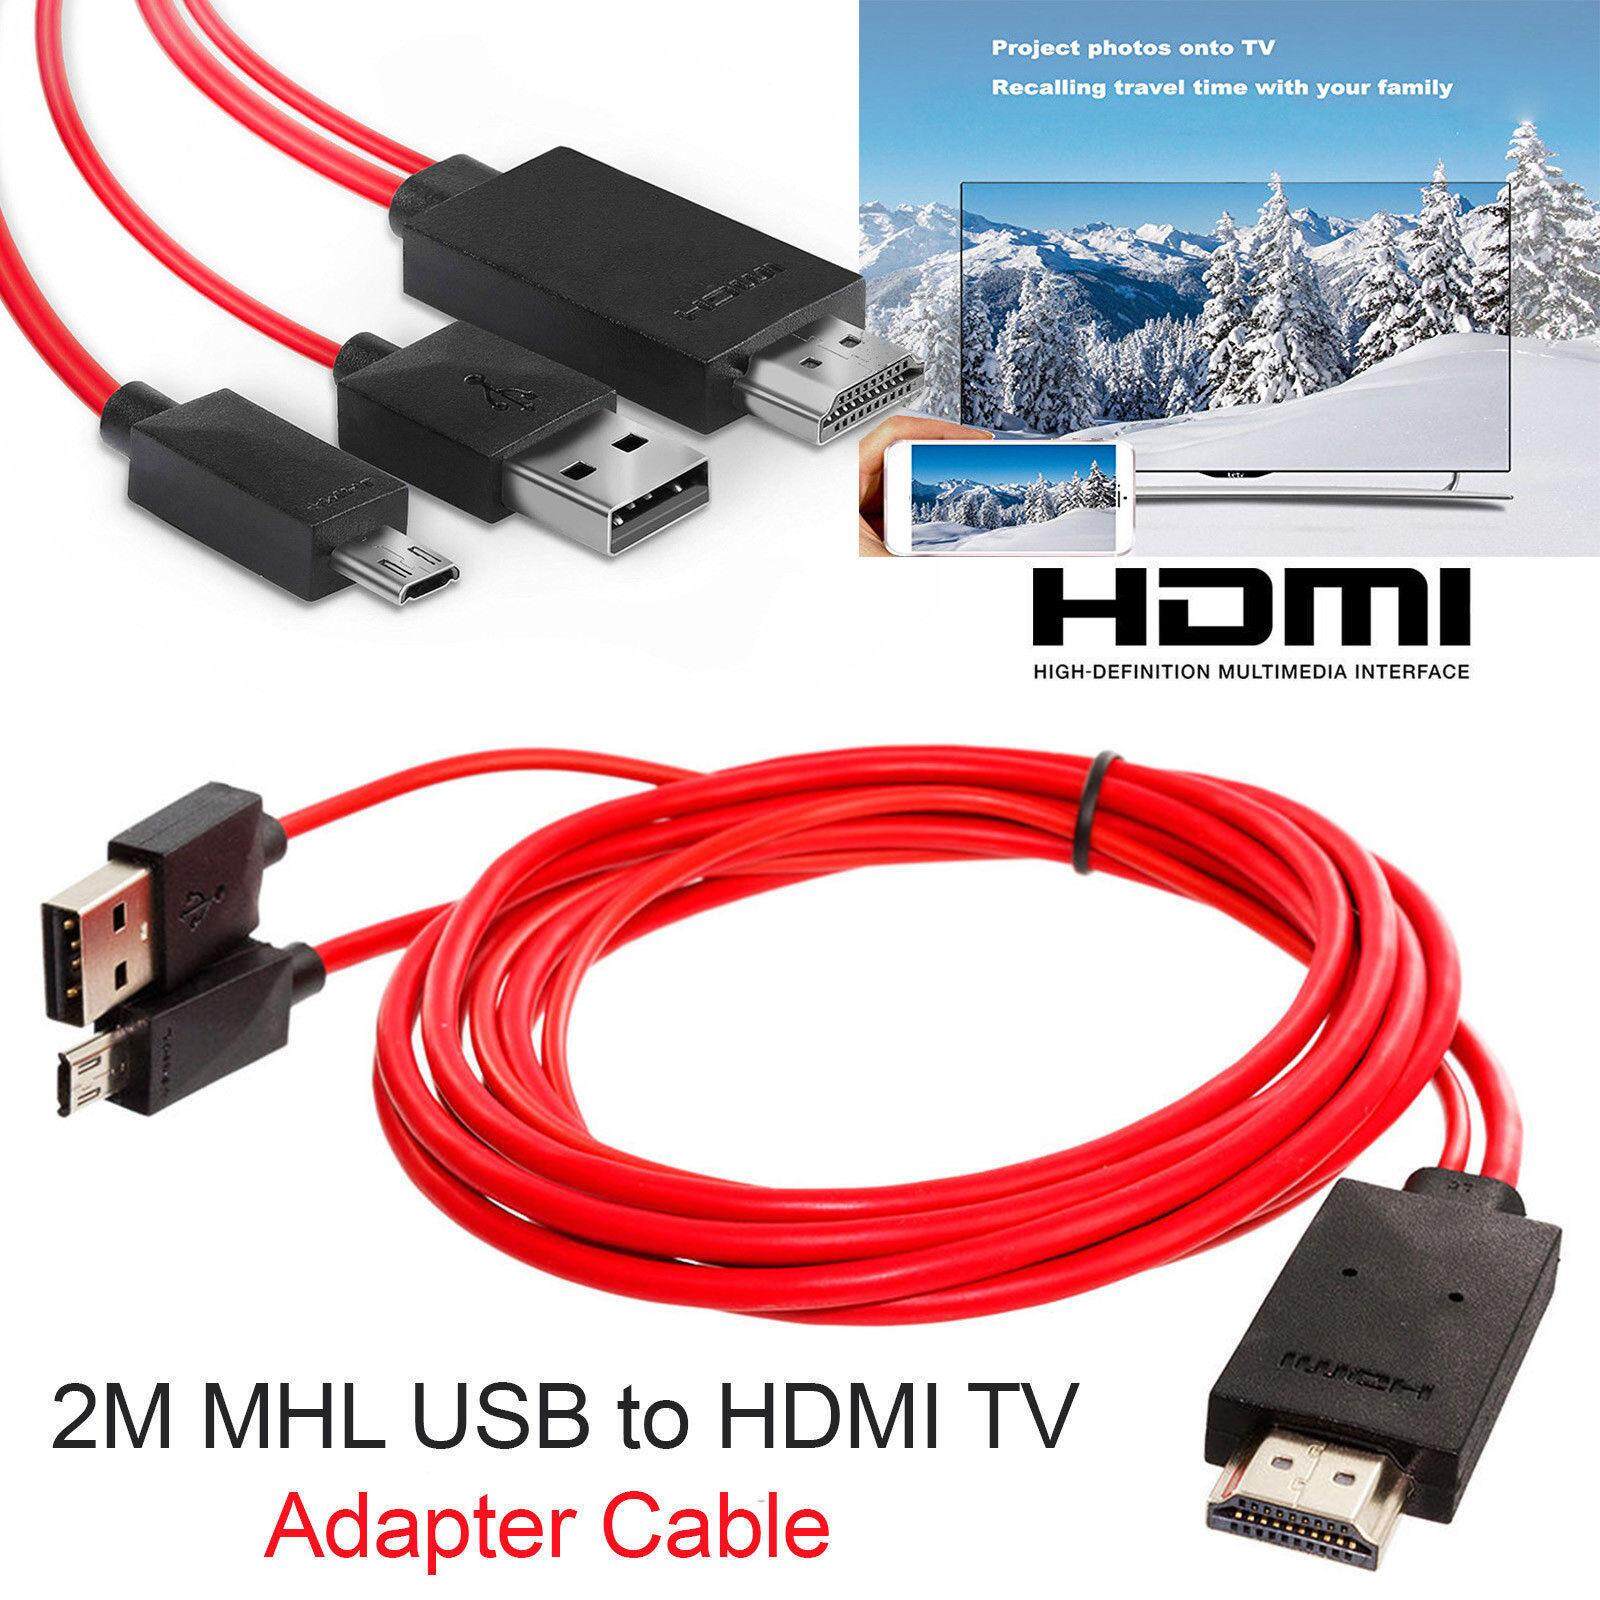 MHL Micro USB to HDMI 1080P HD สายแปลง MHL to HDMI TV Cable Adapter For Samsung Galaxy S3/4/5 Note 2/3/4/8